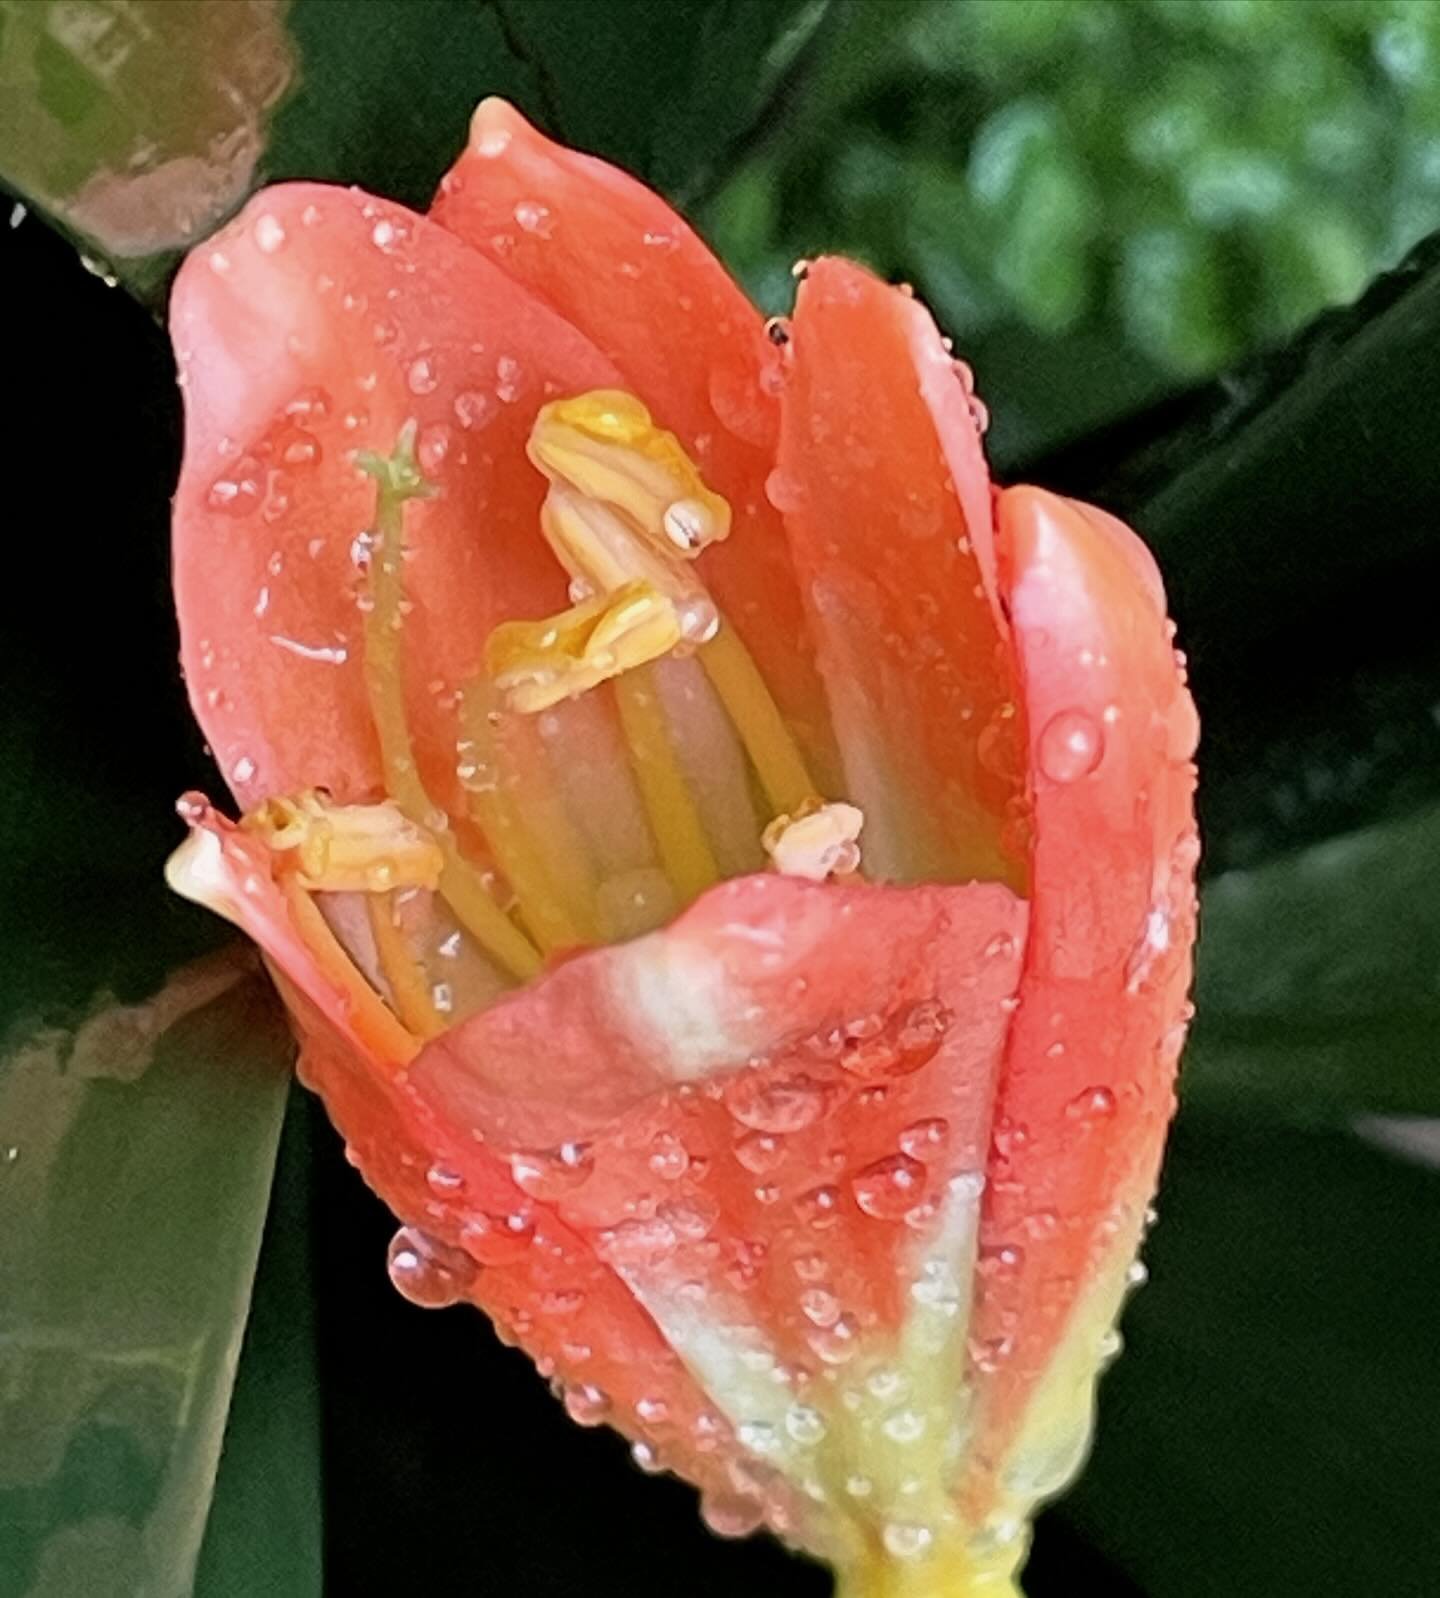 🧡🫶🧡To be able to see beauty in all around you, will help you to never grow old! - Dr Christina 
.
.
.
#dr_christina #personalleadershipcoach #veer_care #clivia #flower #bloom #plant #naturephotography #naturelovers #naturegram #naturetherapy #disa